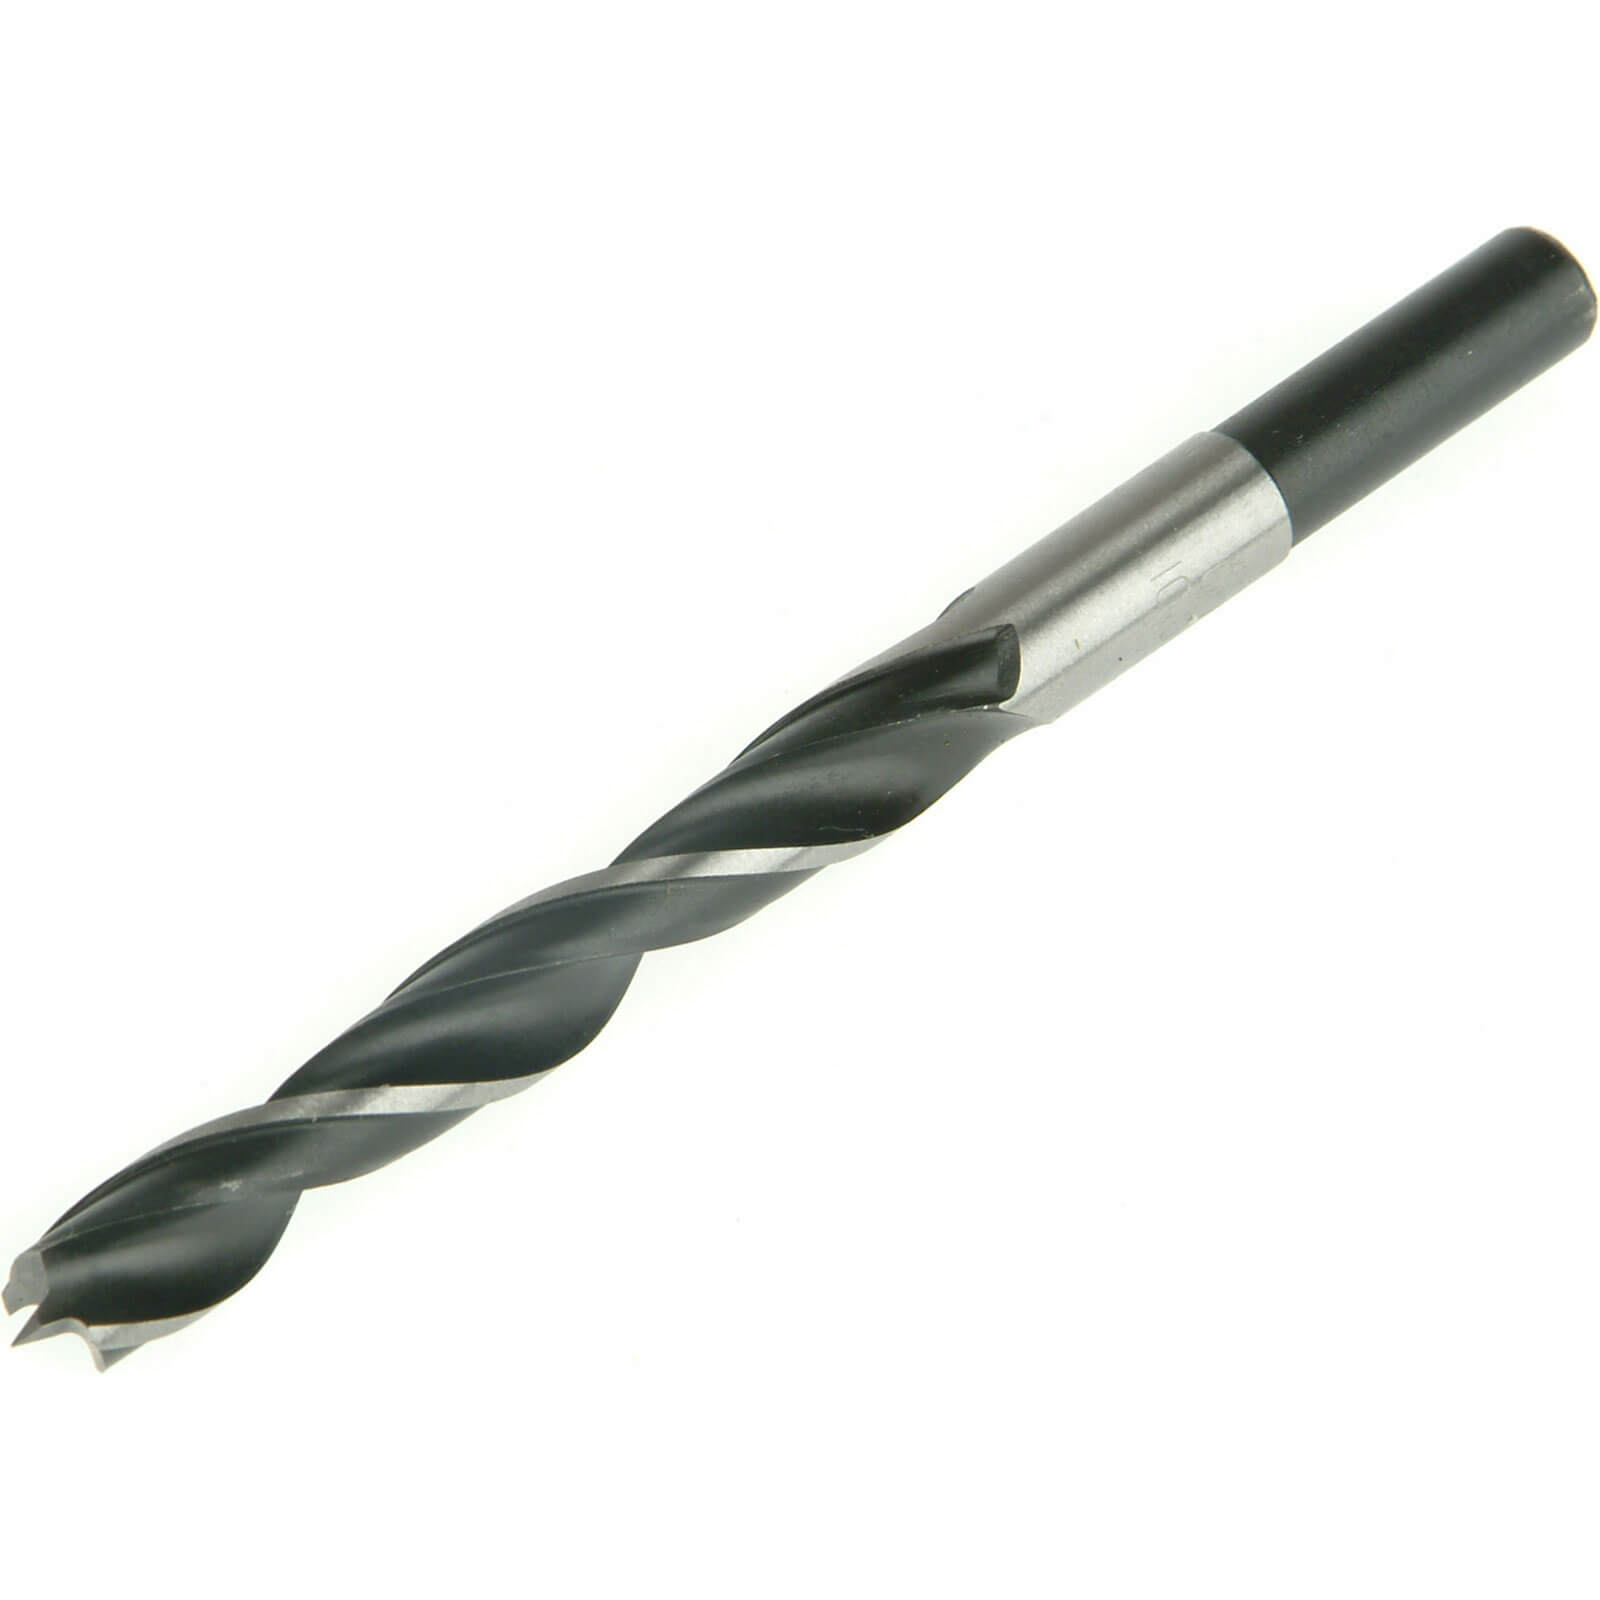 Photo of Faithfull Lip And Spur Wood Drill Bit 6mm